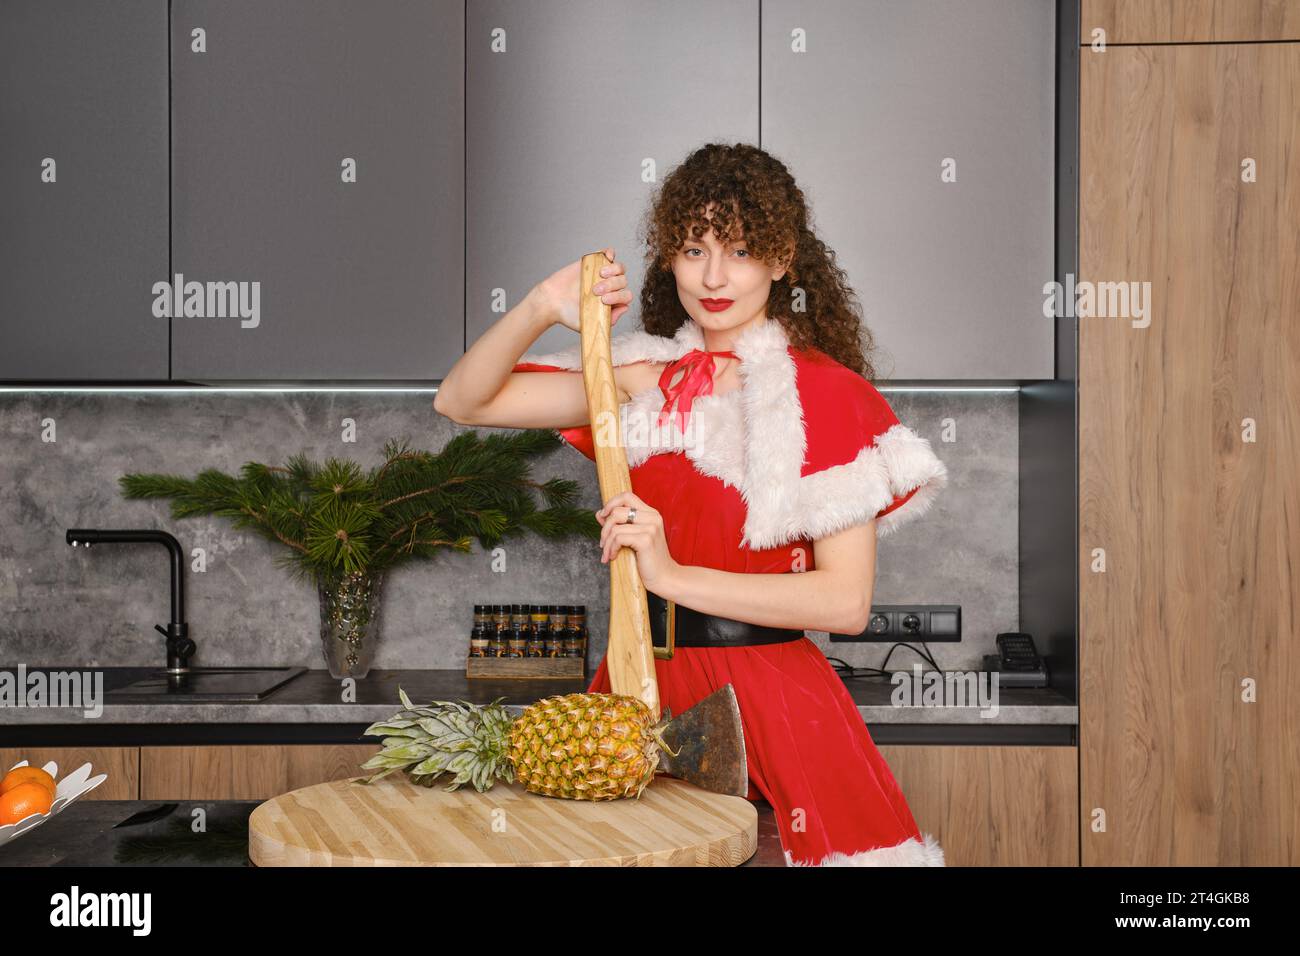 Young woman in Christmas red dress leaning on an axe in the kitchen Stock Photo